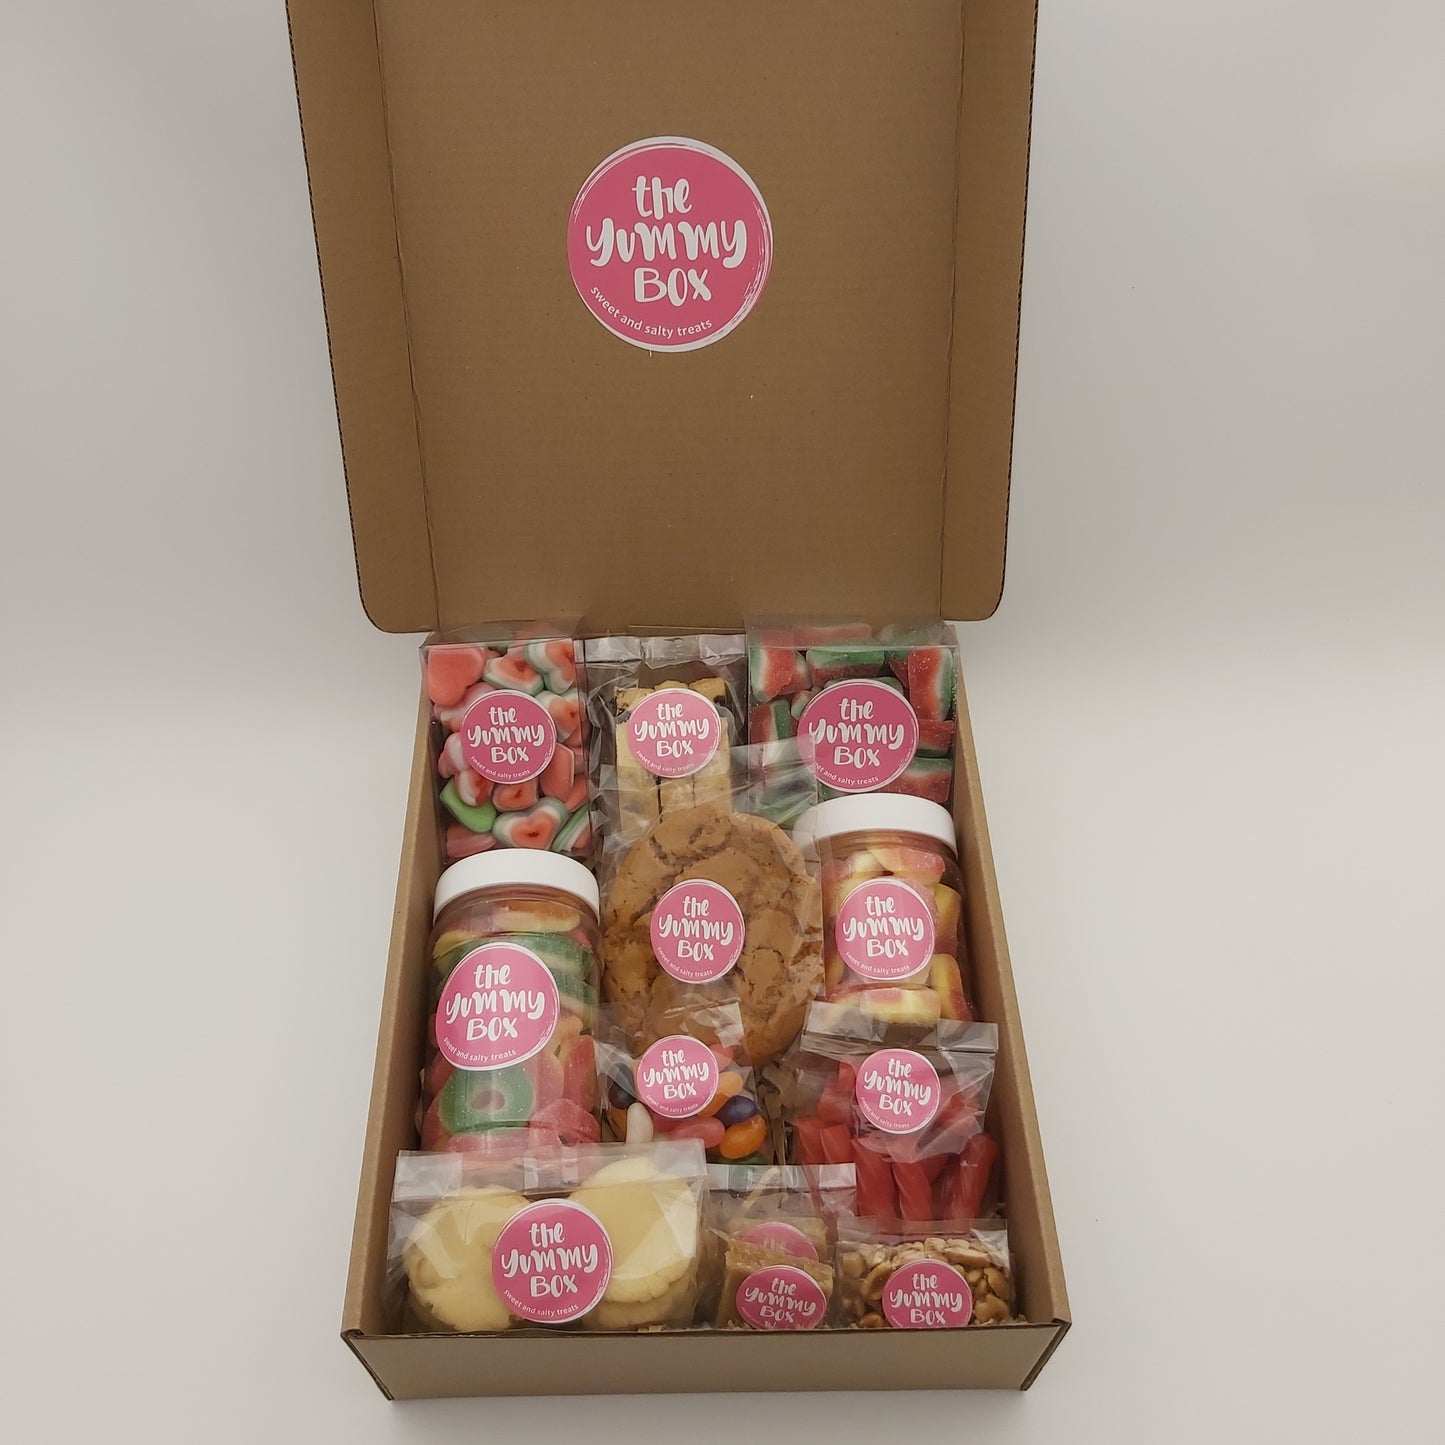 The Sweet and Cookie Yummy Box